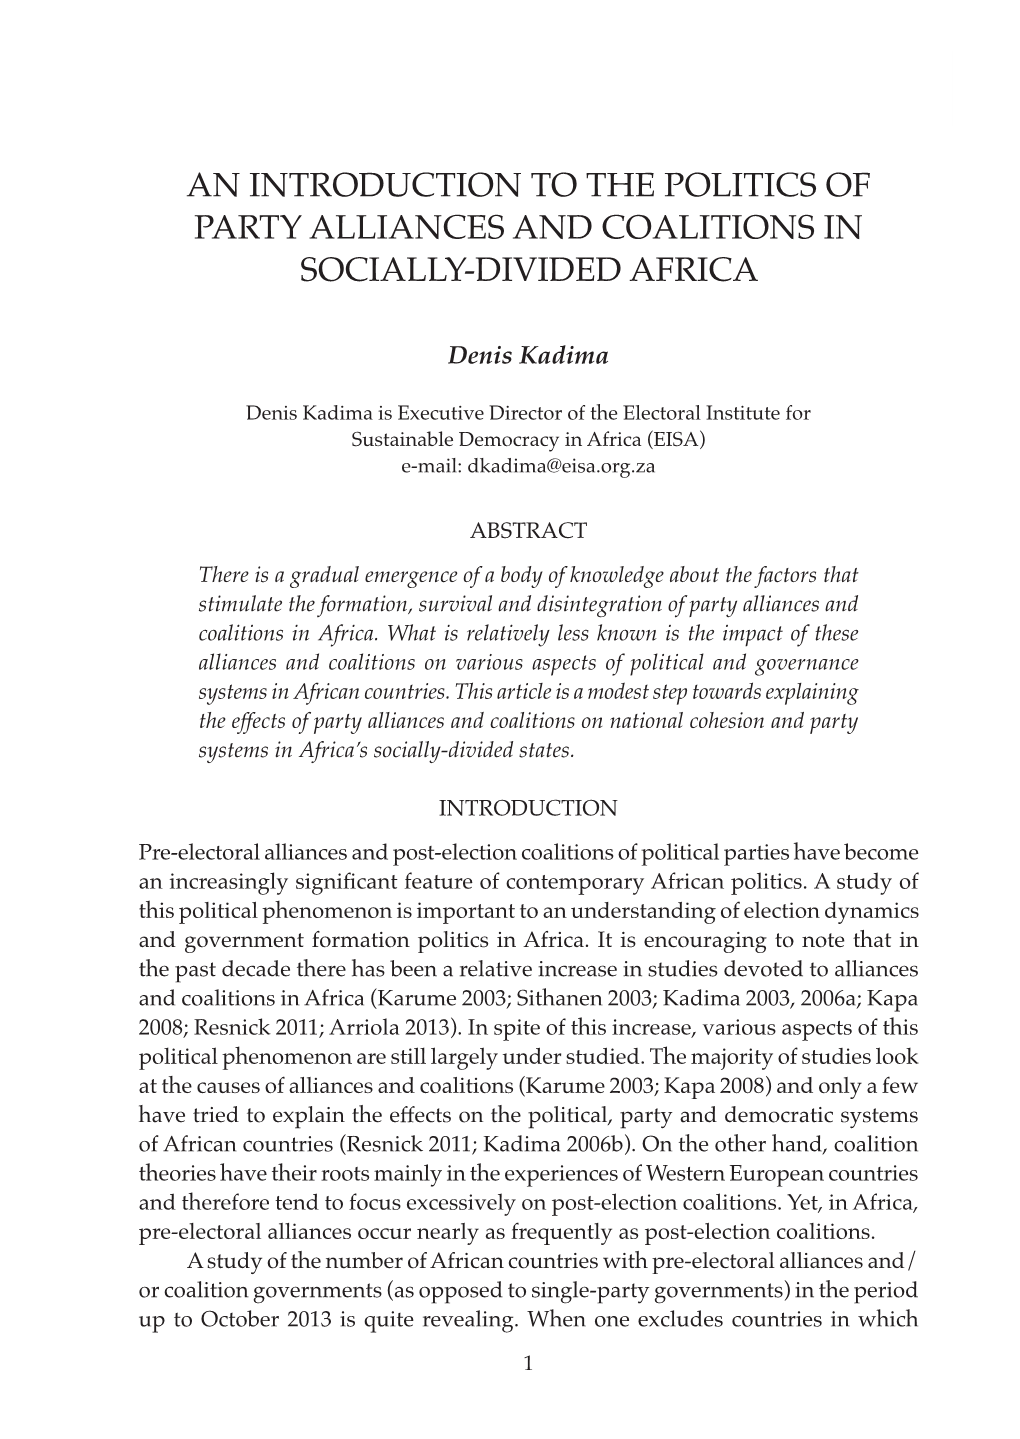 An Introduction to the Politics of Party Alliances and Coalitions in Socially-Divided Africa